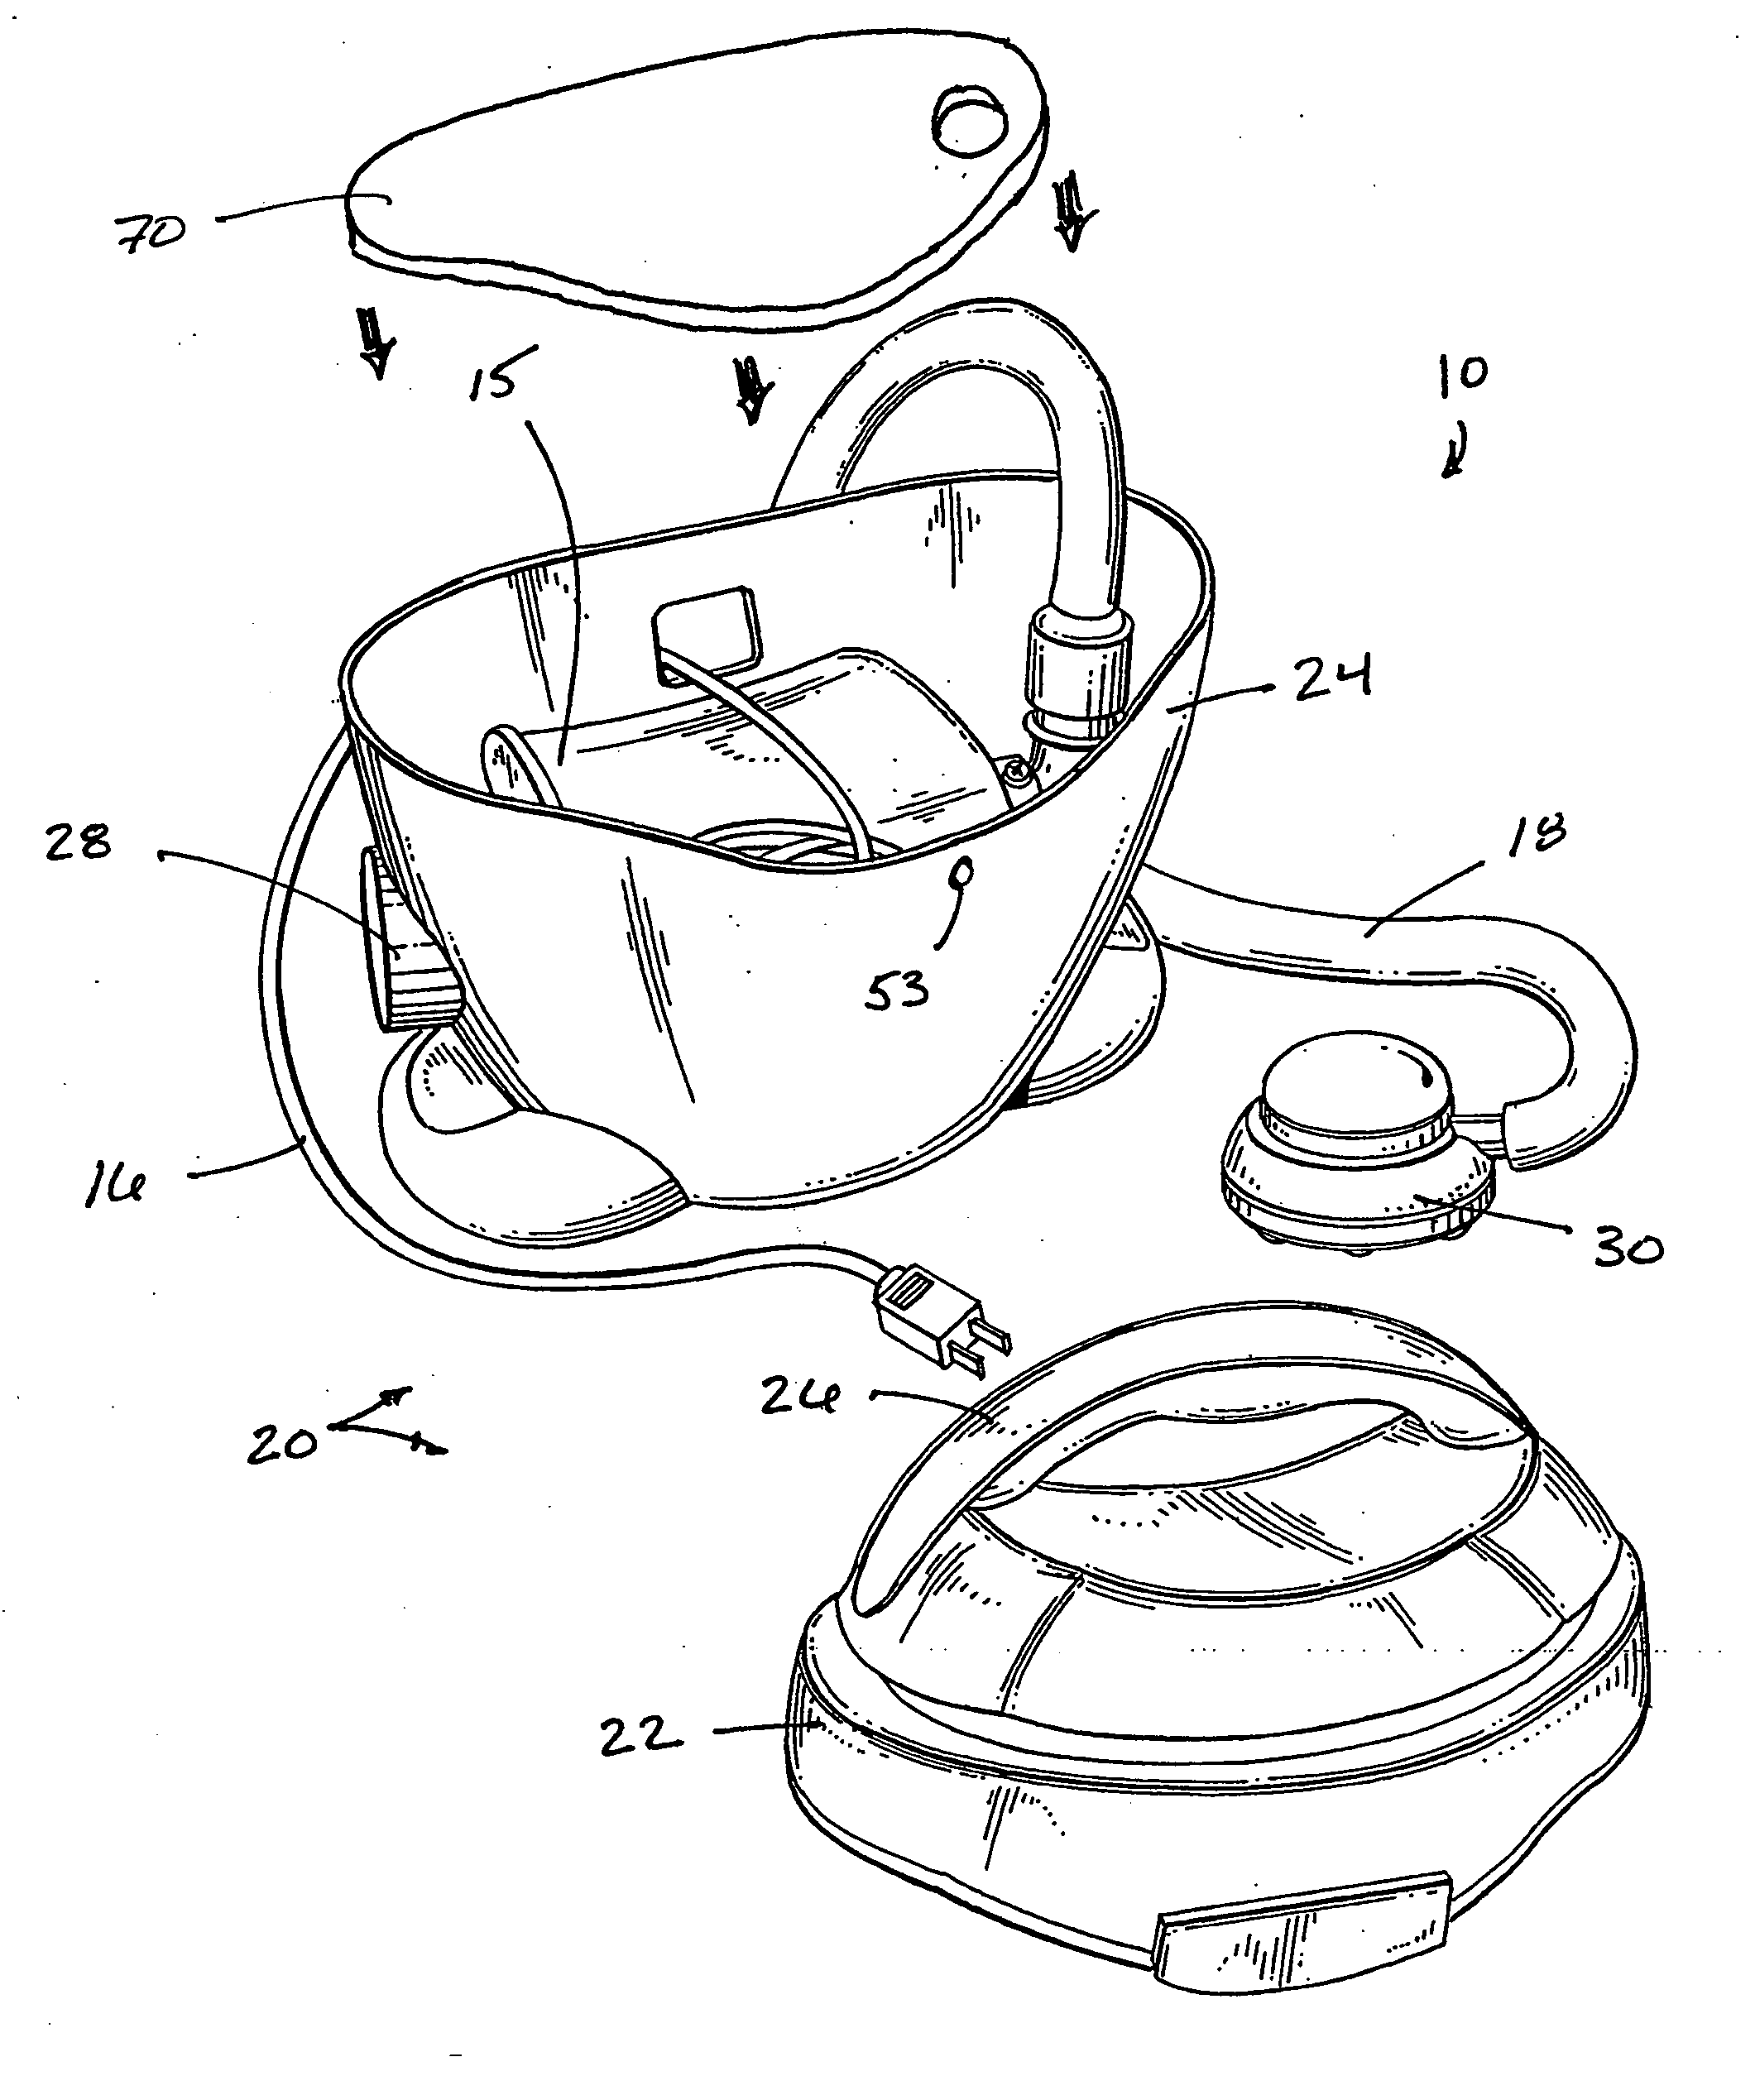 Apparatus and system for treating cellulite